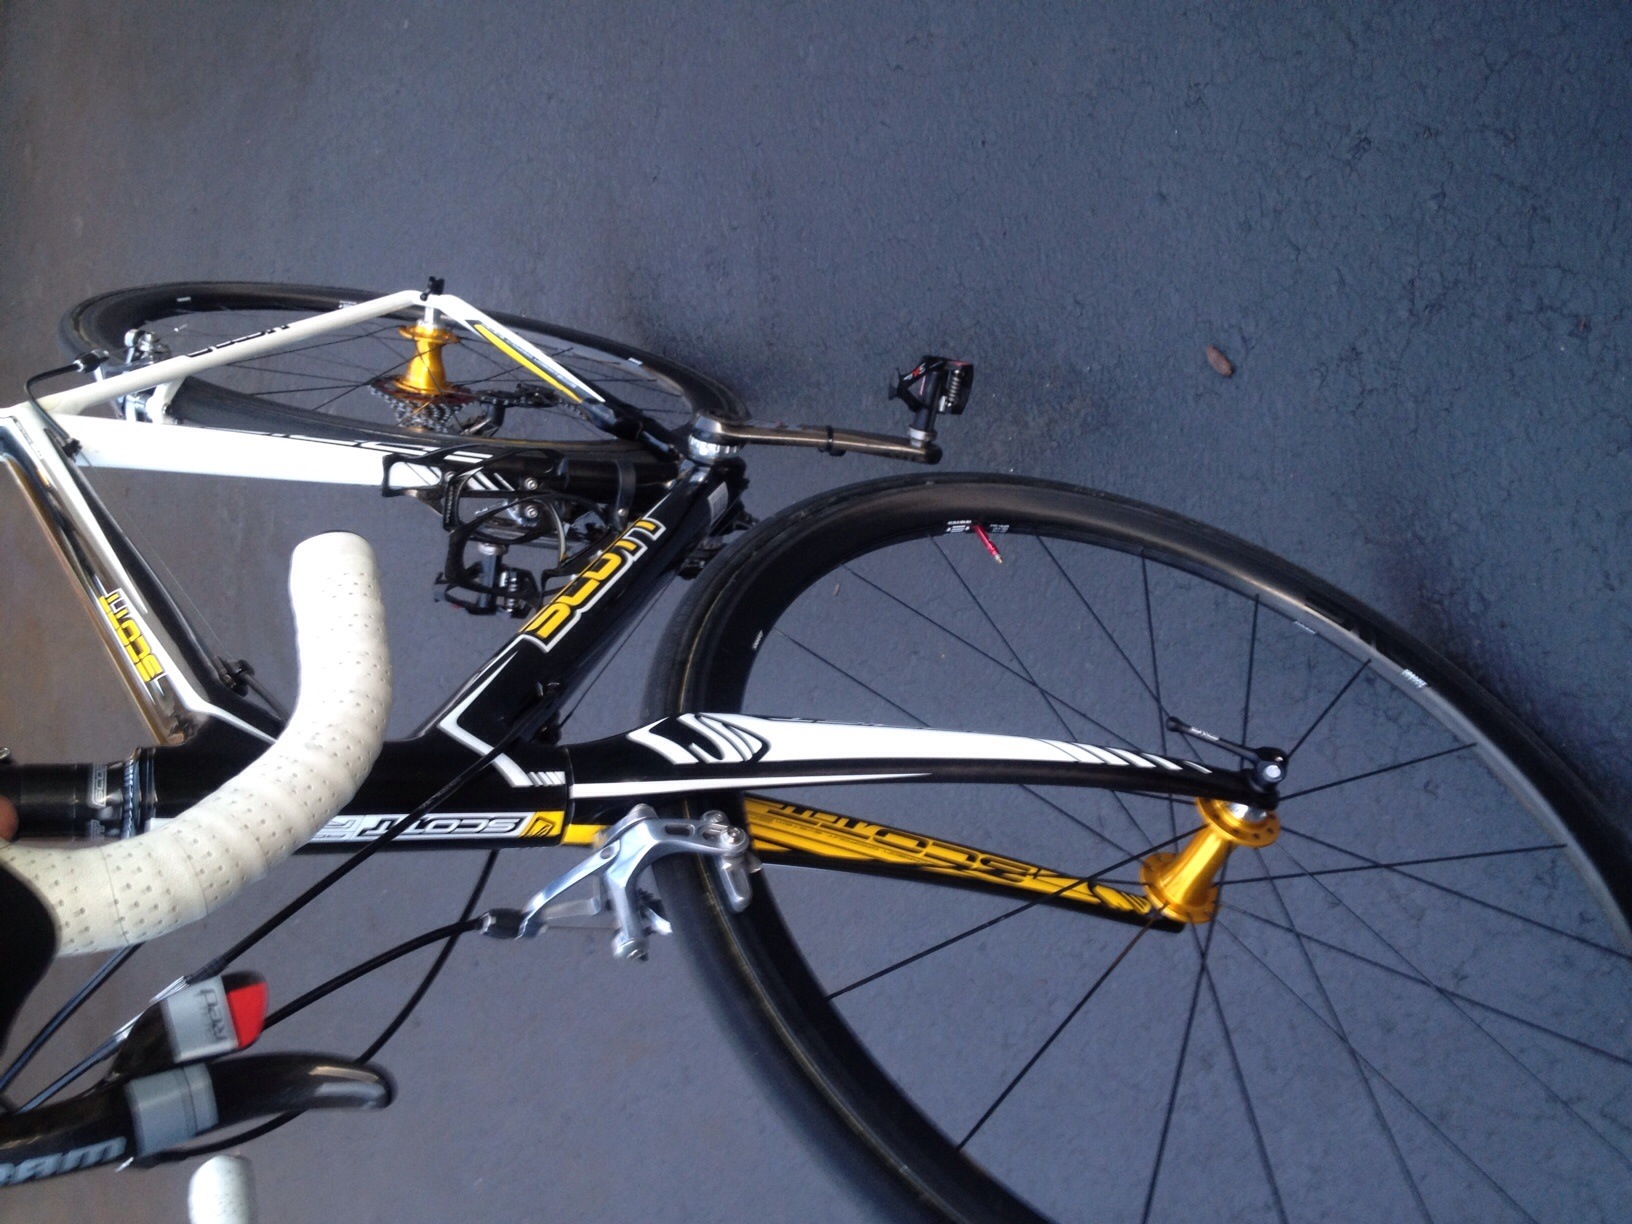 a close up view of a bicycle with yellow bars